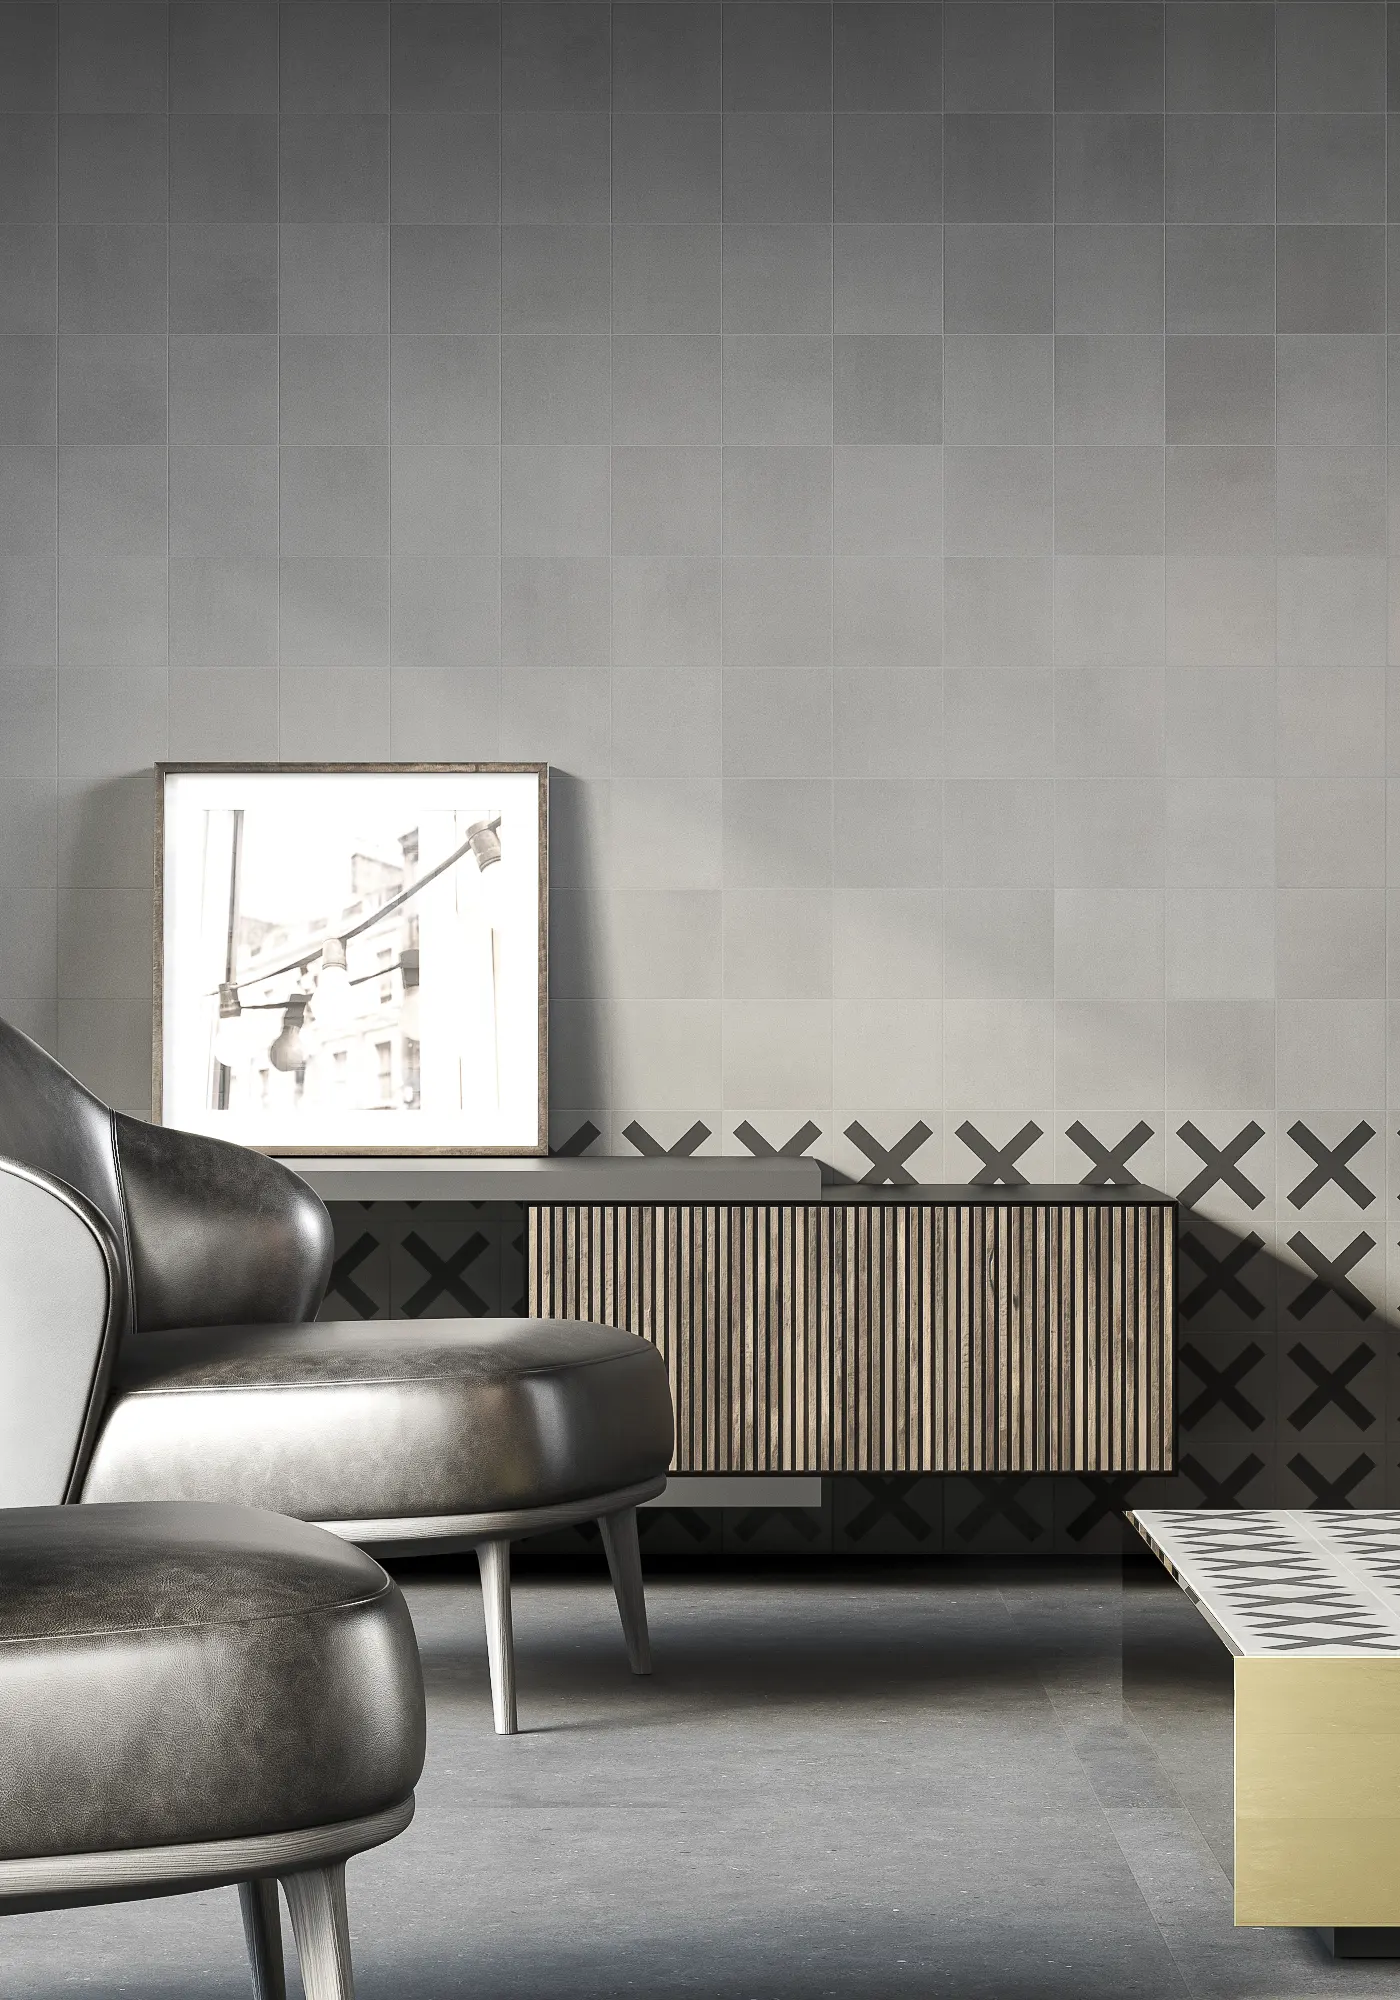 Living room with concrete wall tiles in 15x15 cm. made out of gray cement